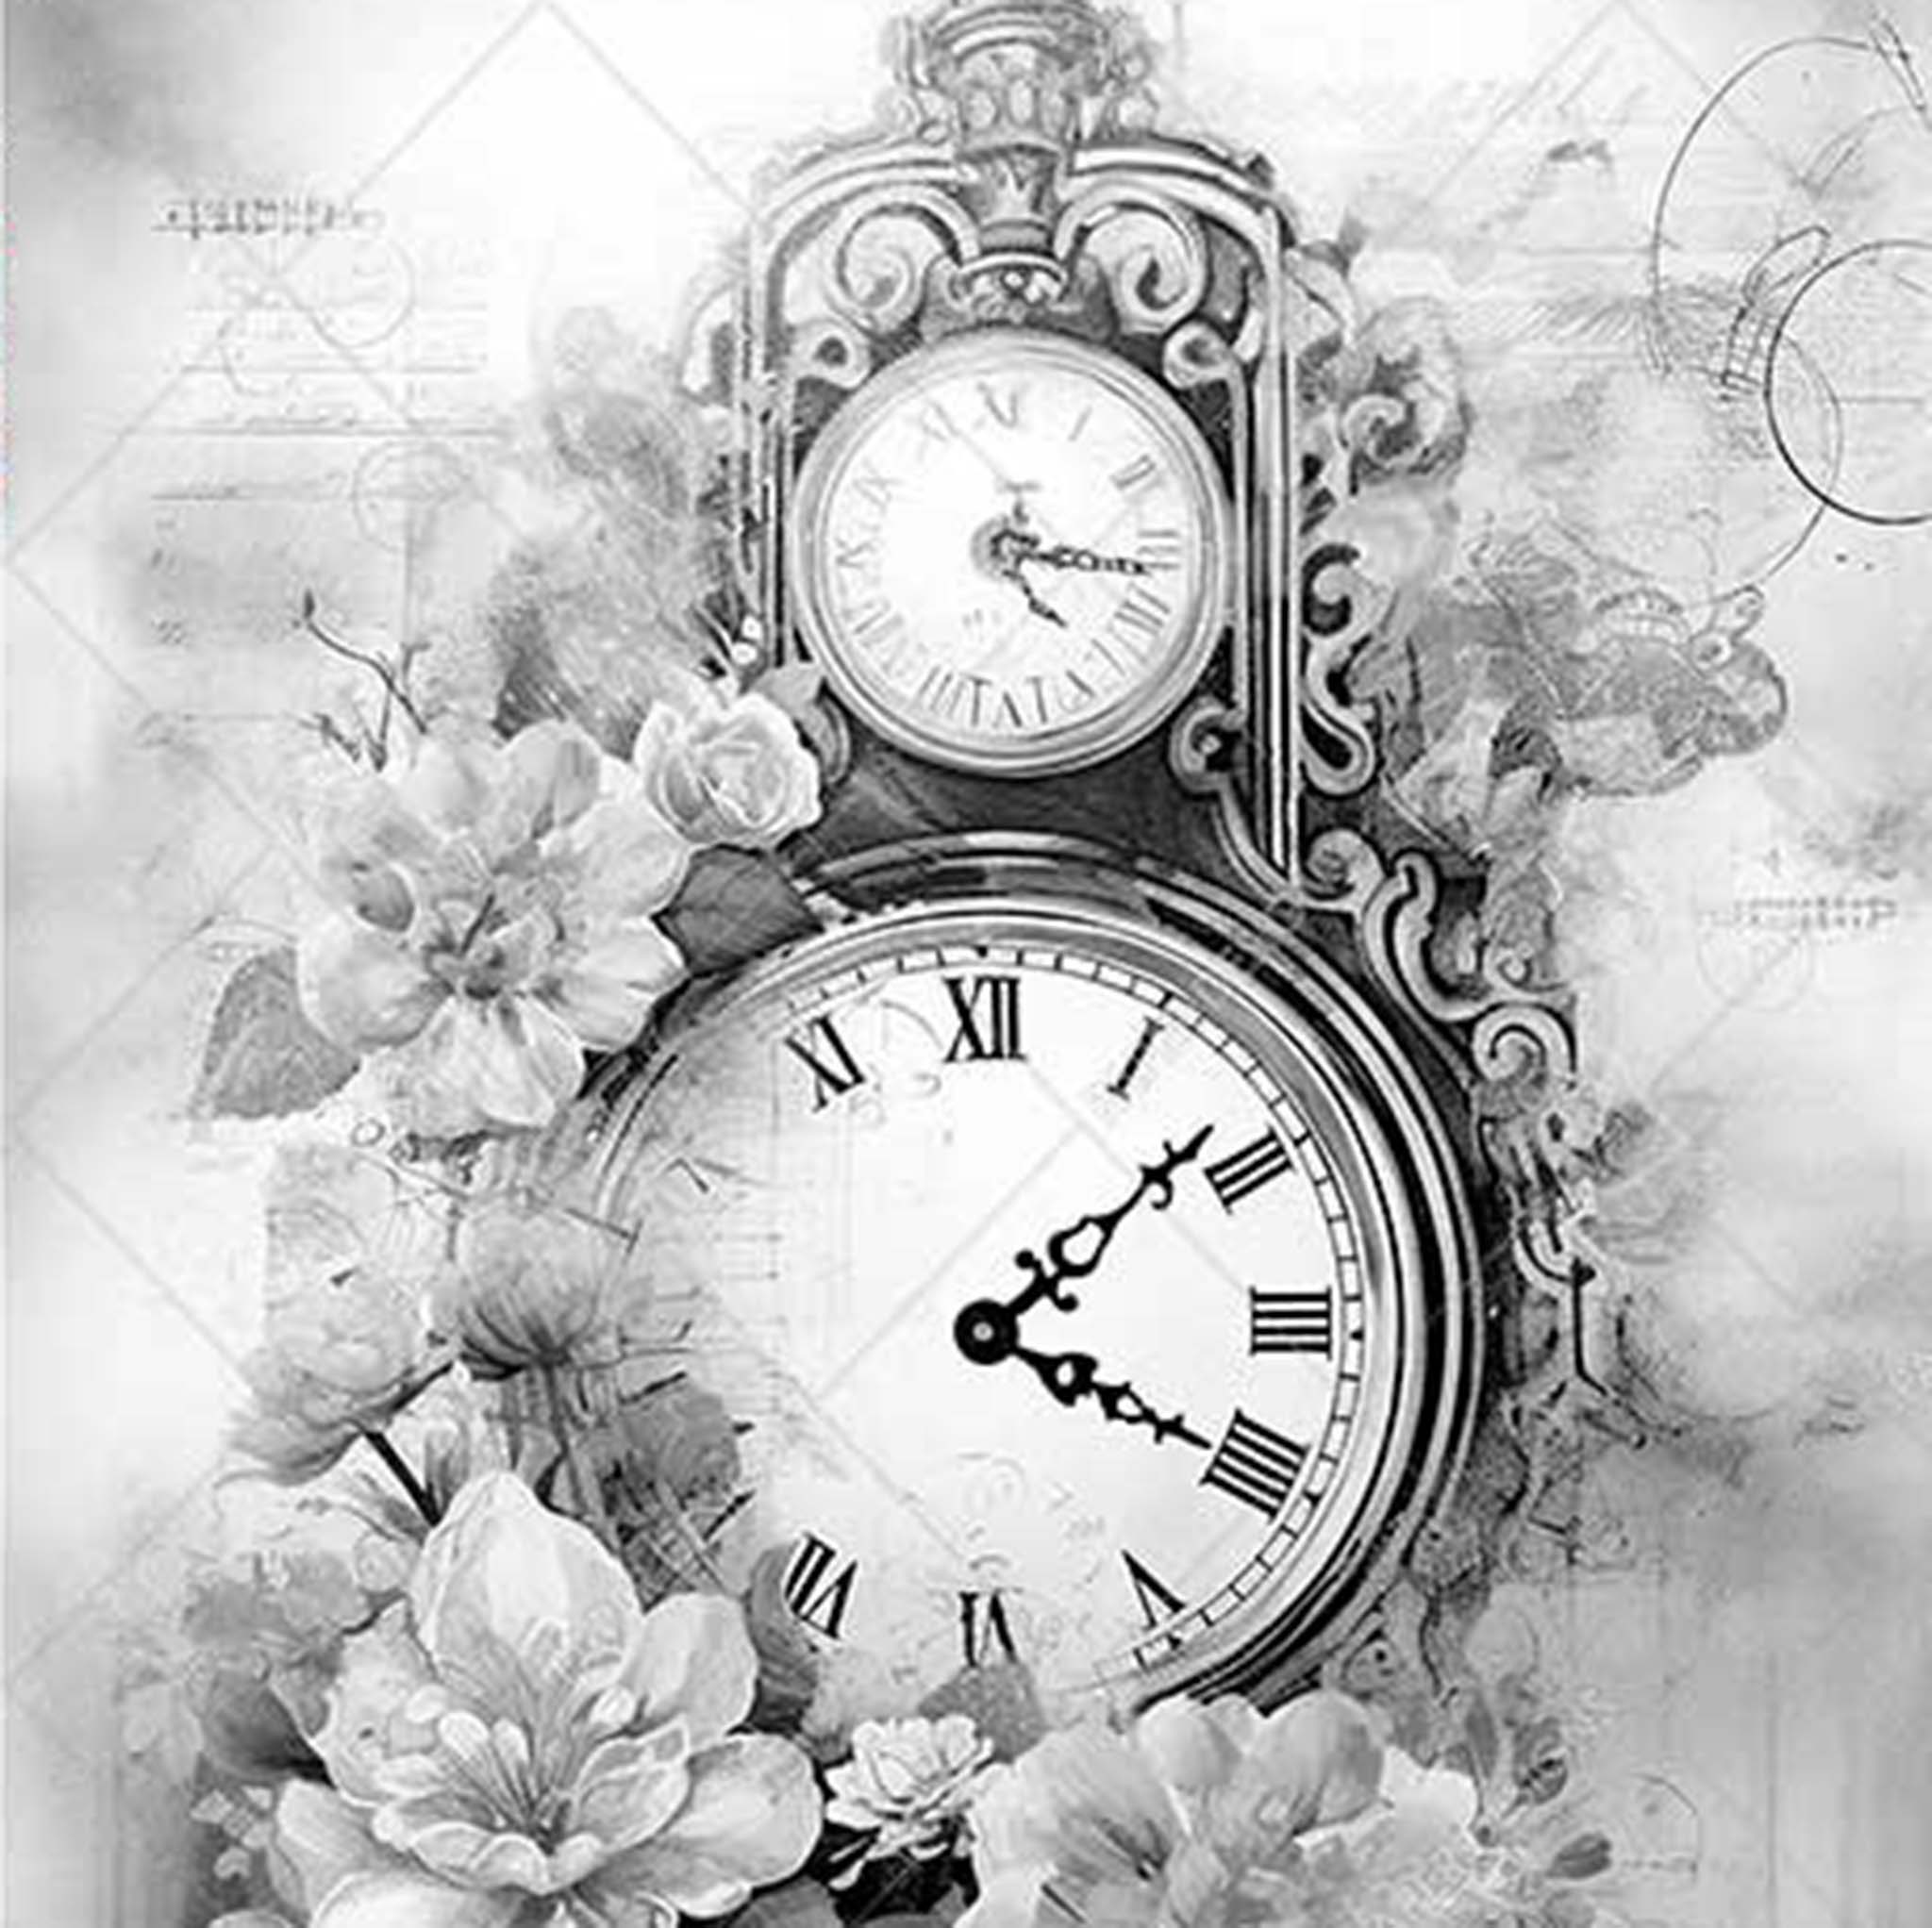 A4 rice paper design featuring a black and white image of an ornate clock surrounded by delicate flowers.